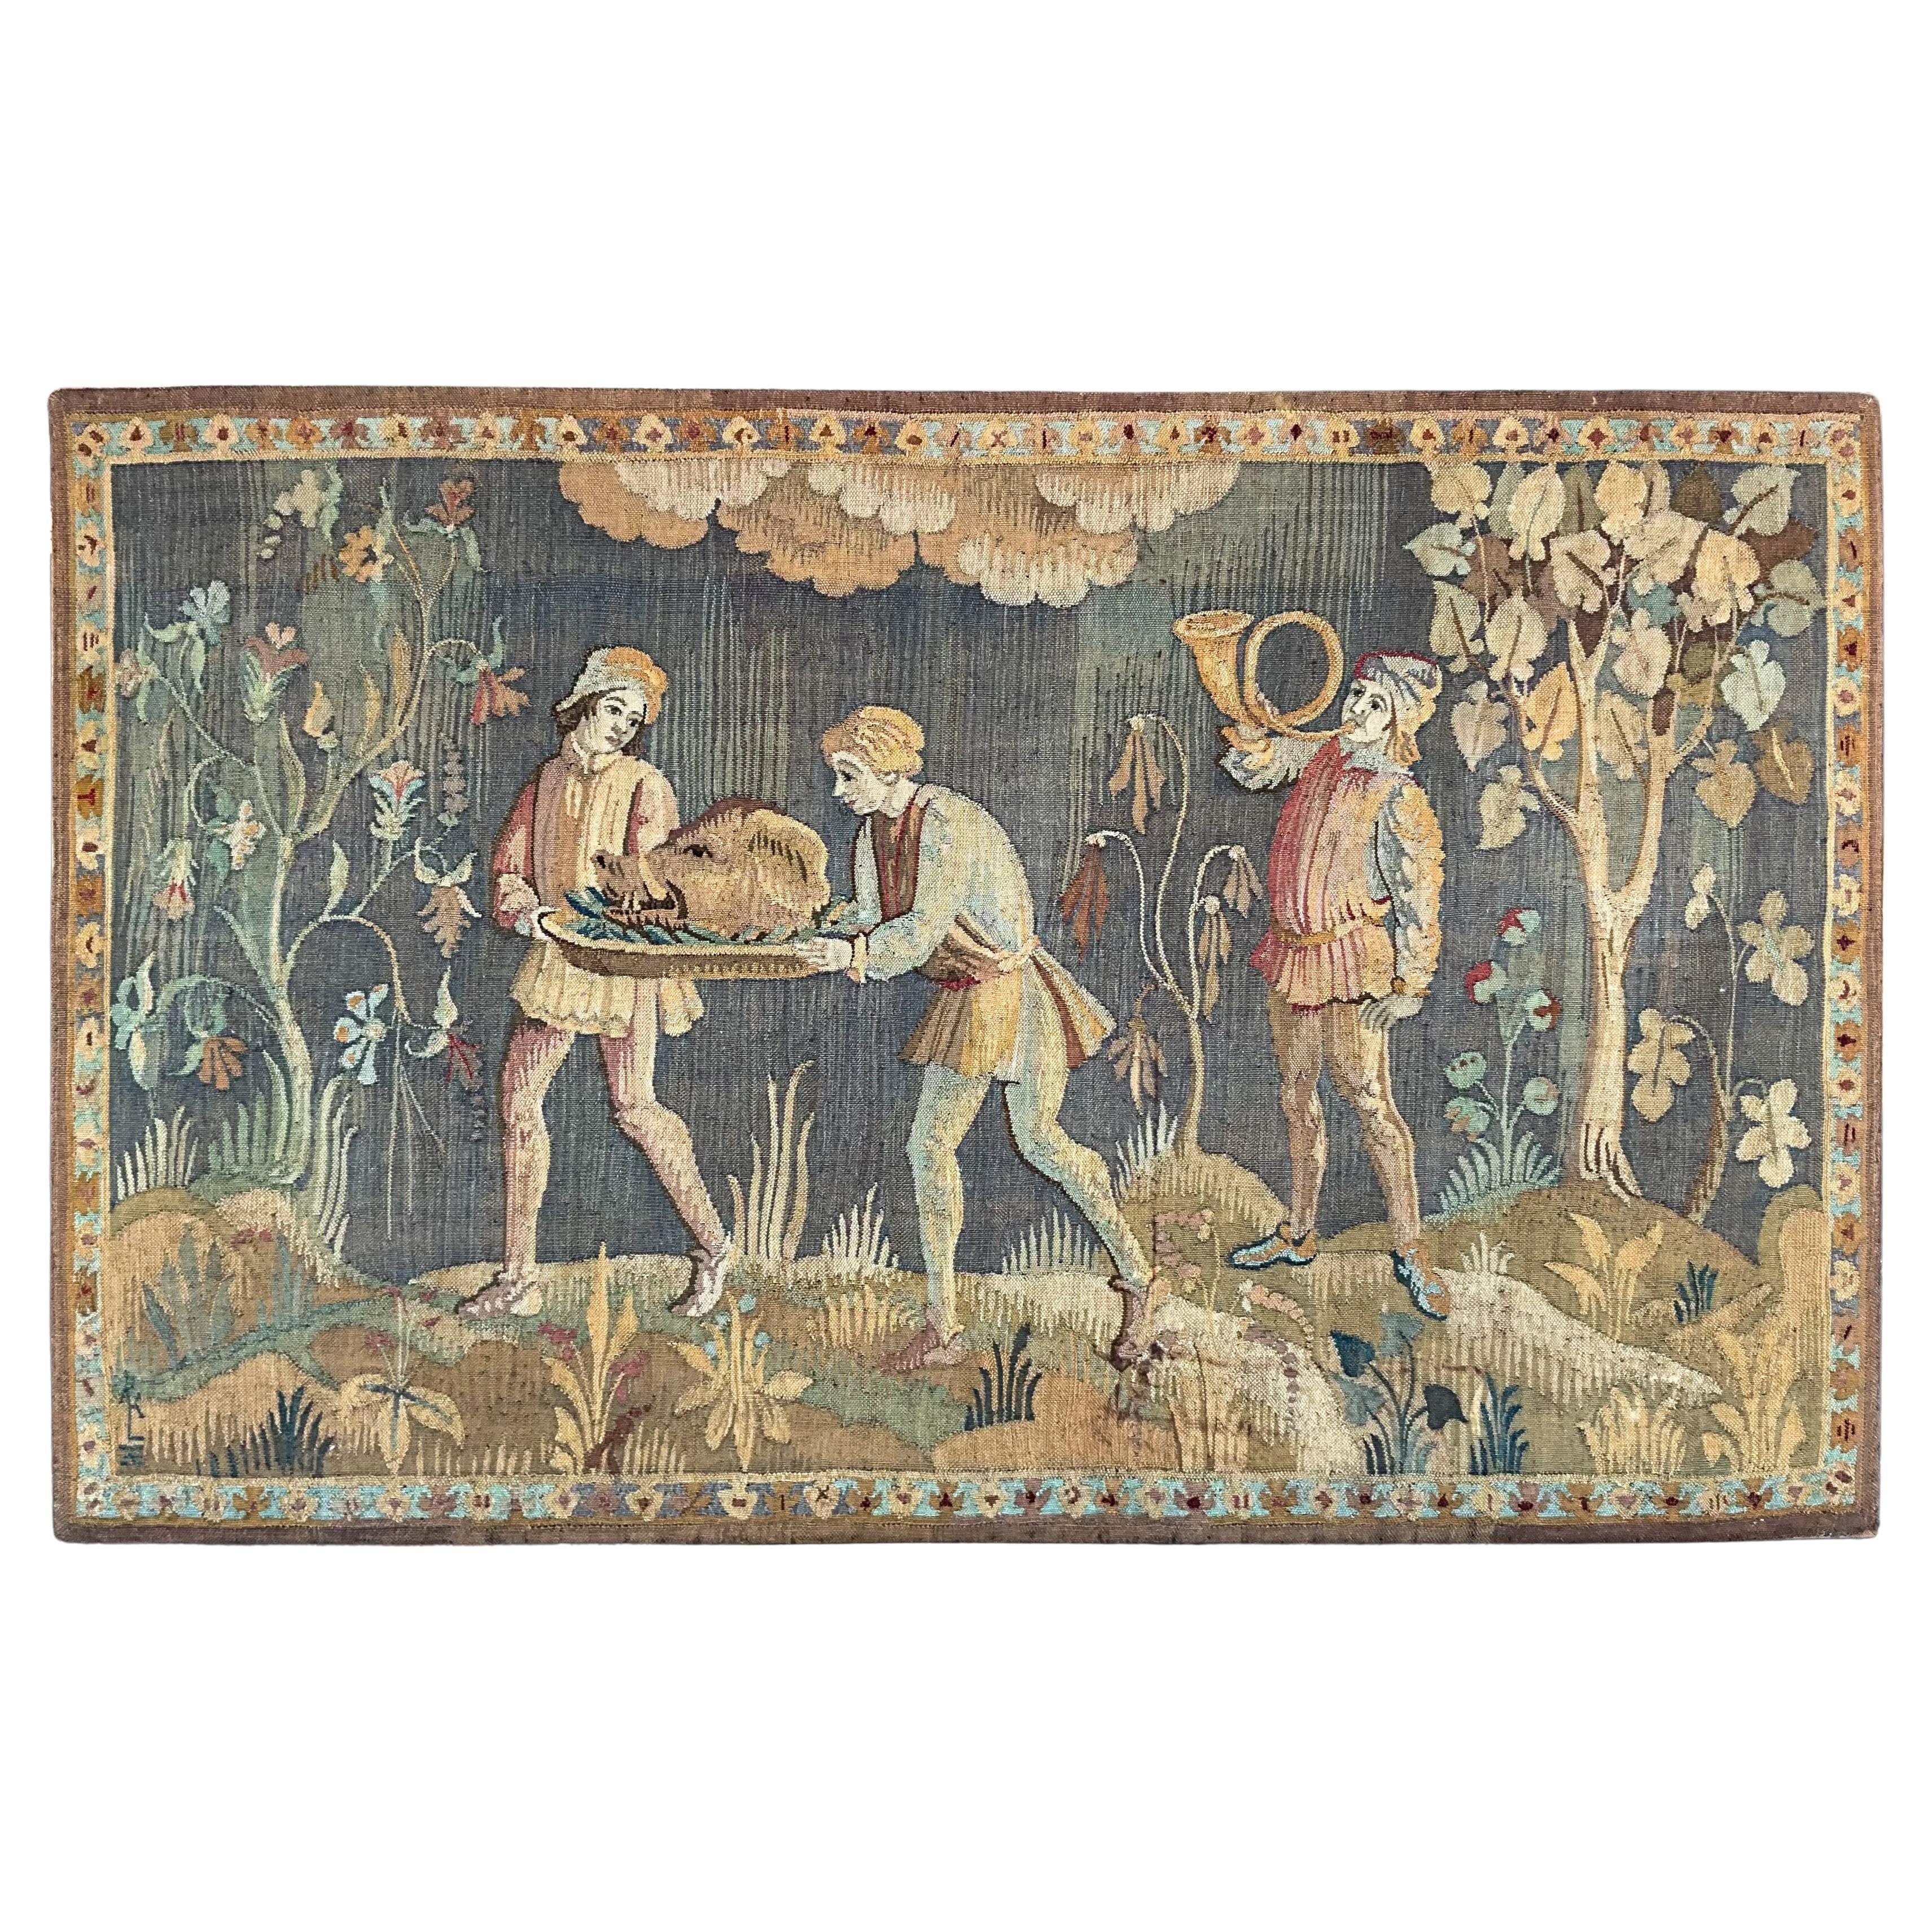 This is a 19th century continental tapestry depicting the Boar’s head feast. The tapestry is mounted on a large wooden stretcher with hanging wire. The Boar’s Head feast originated in Rome but was adopted by the church in medieval England to